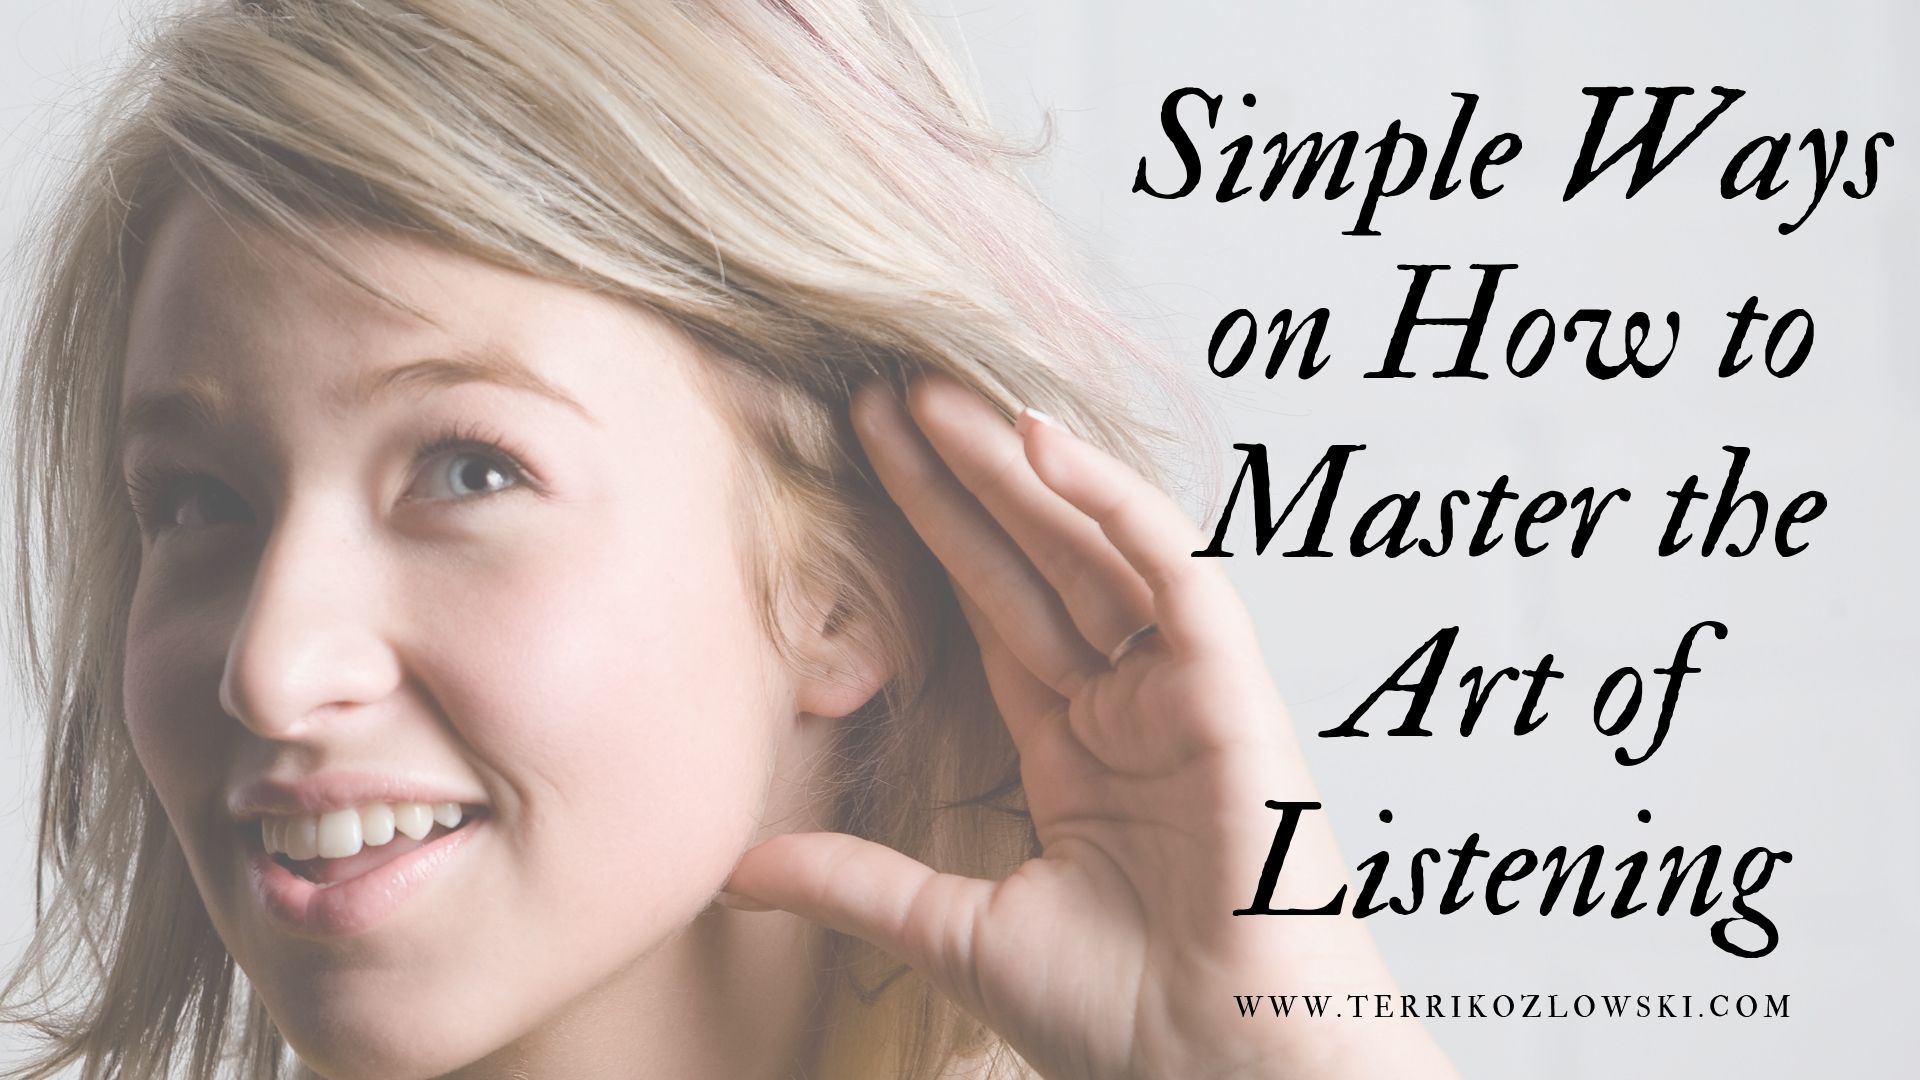 Active Listening is part of Authentic Communication